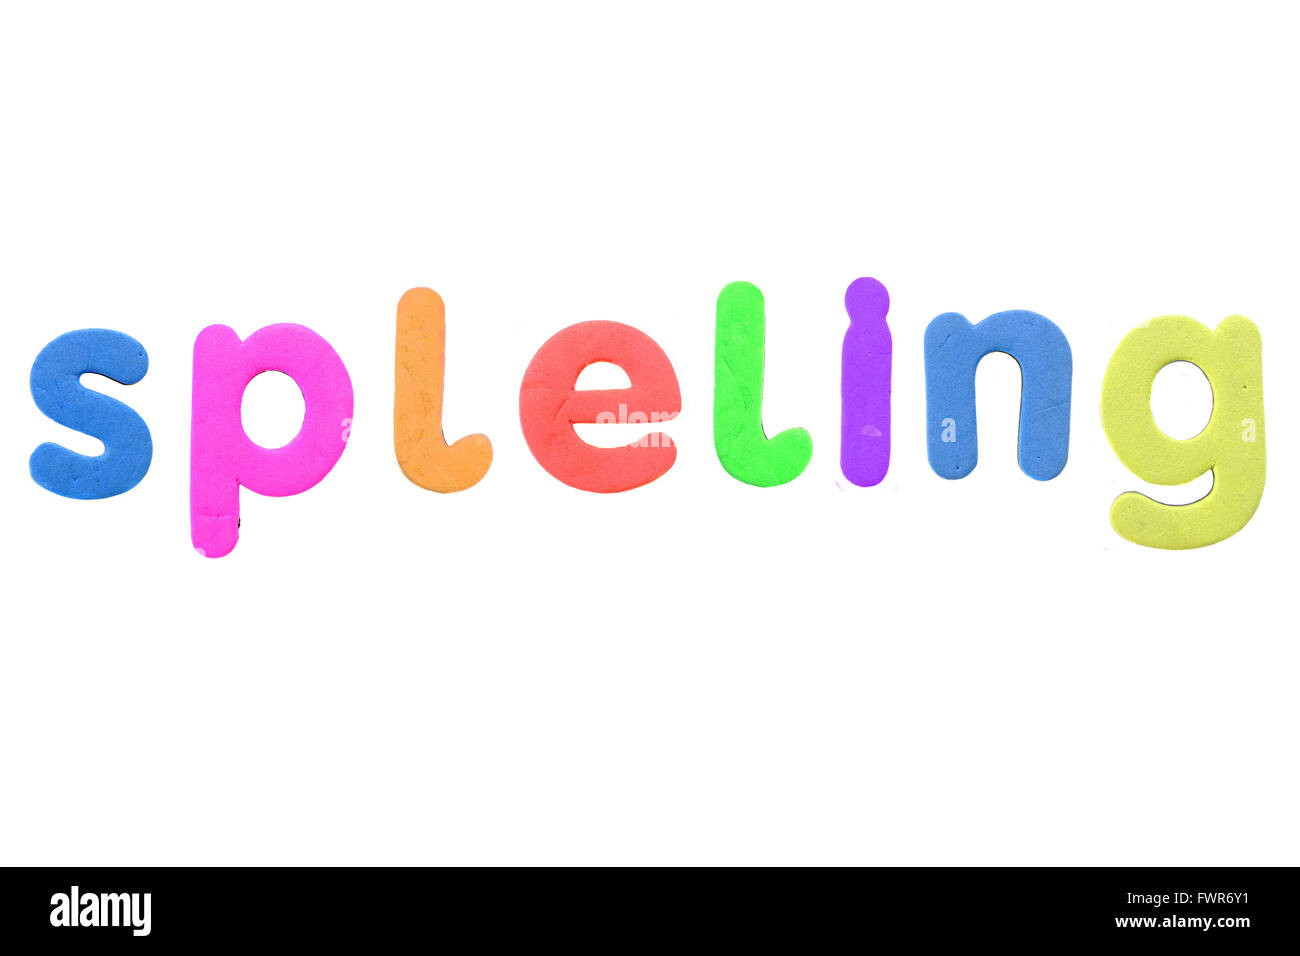 The word spelling (misspelt) created from alphabetic fridge magnets against a white background. Stock Photo